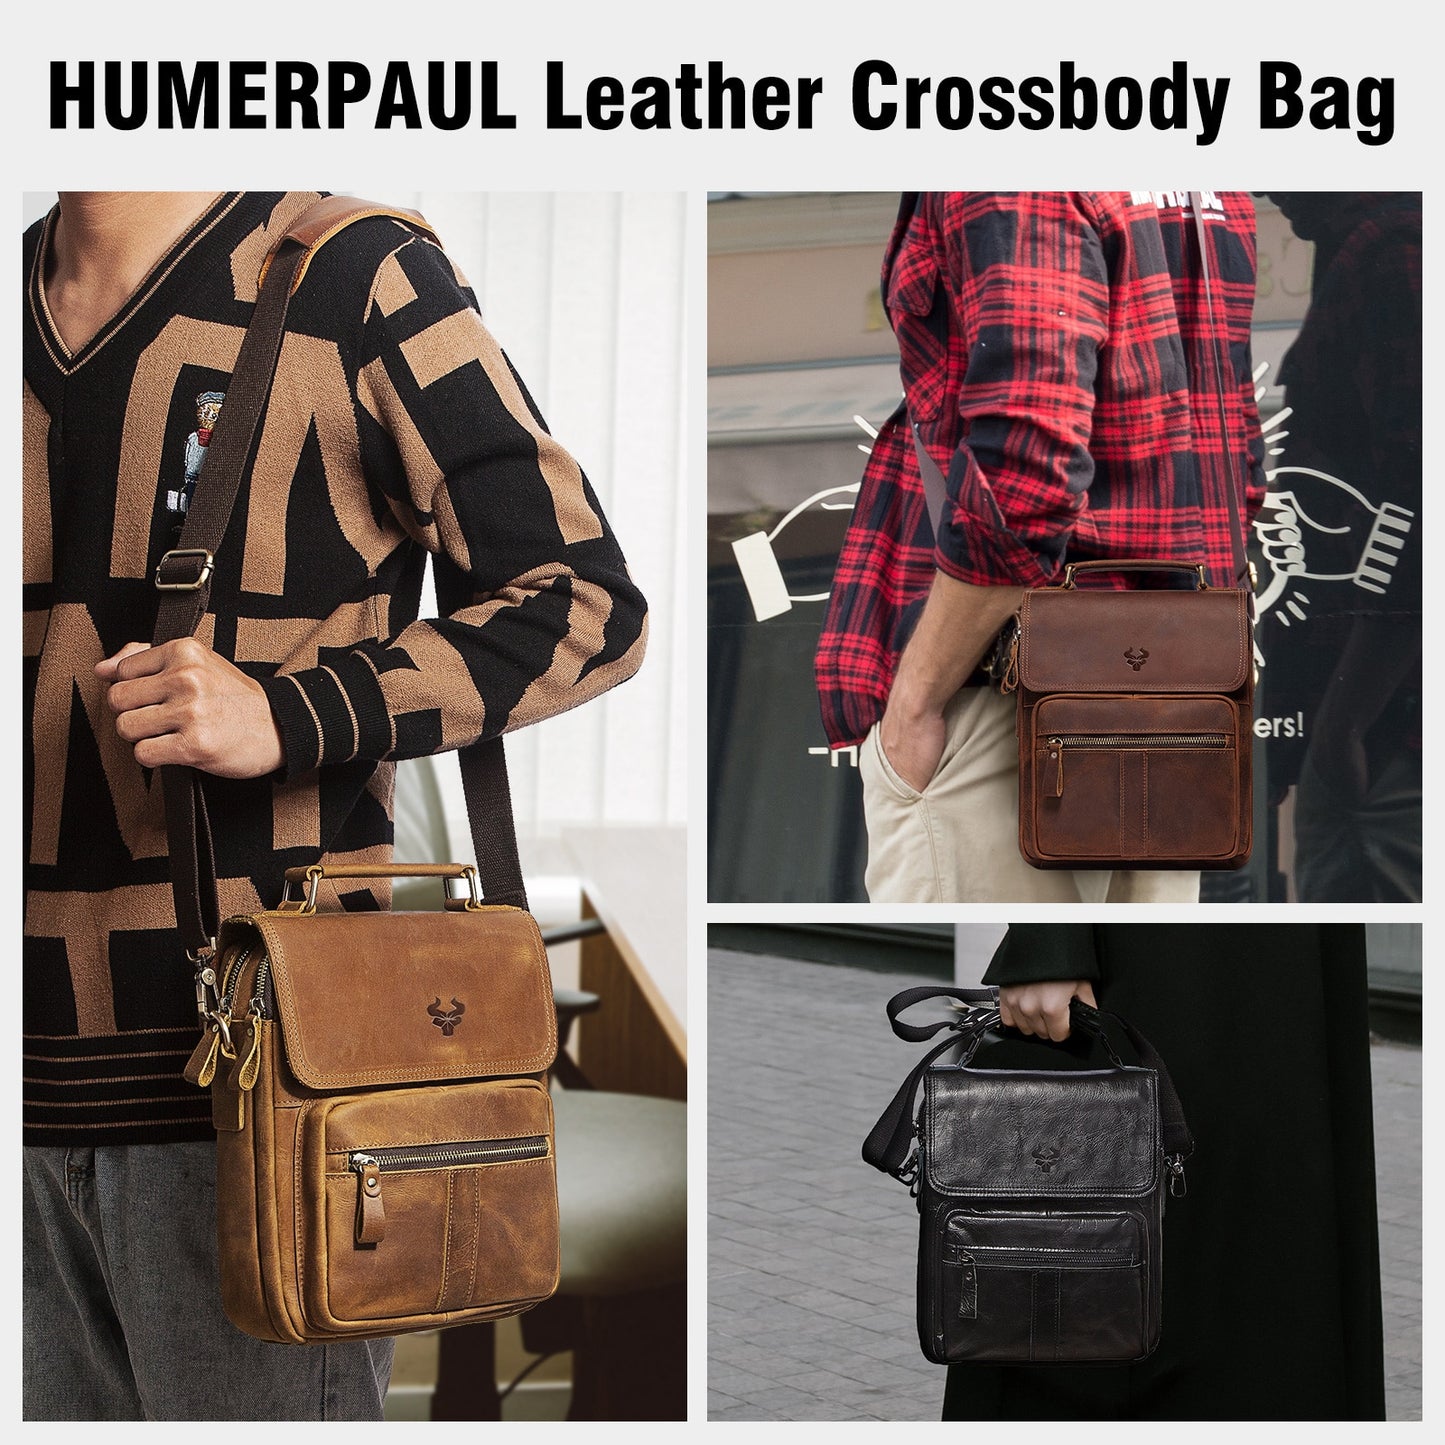 HUMERPAUL Genuine Leather Men's Shoulder Bag Luxury Work Business Messenger Bags Fashion Male Crossbody with Adjustable Straps